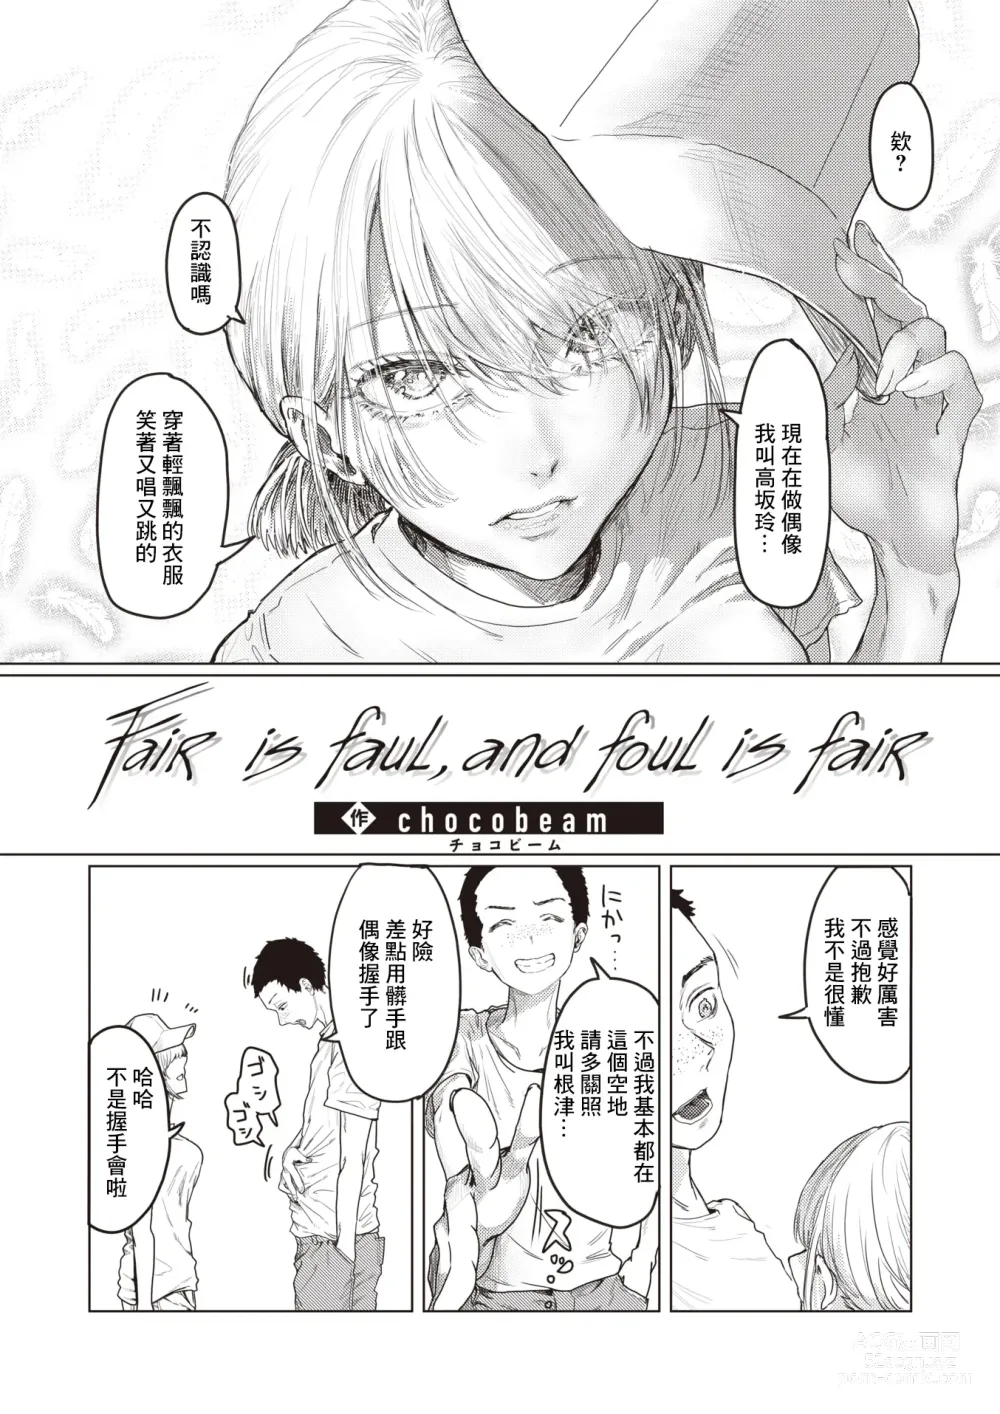 Page 3 of manga Fair is foul, and foul is fair